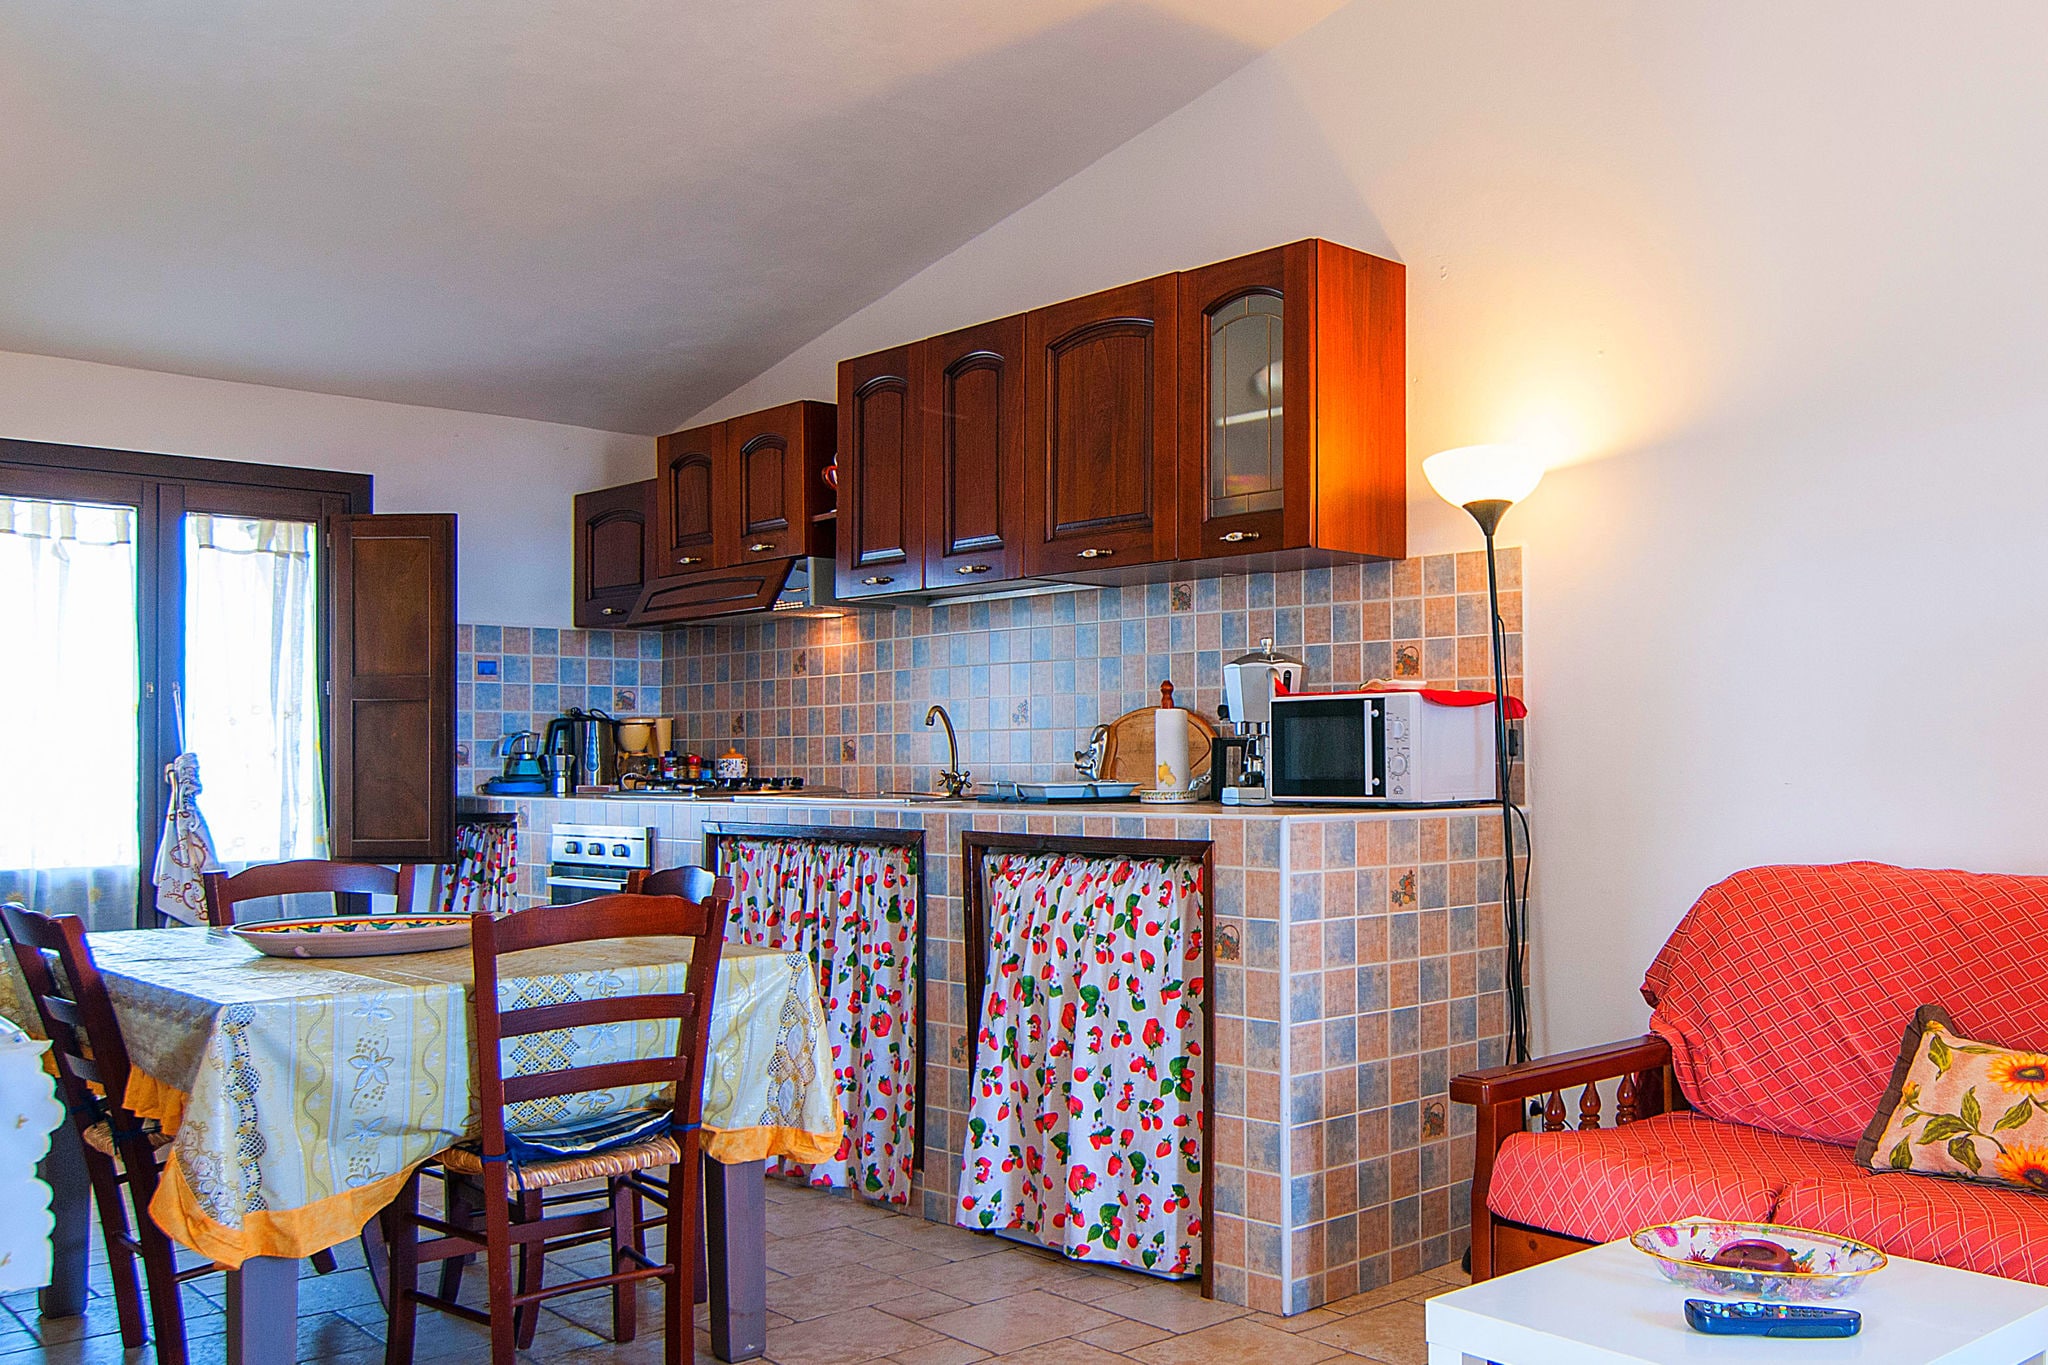 Nice holiday apartment at 200 meters from the sea.